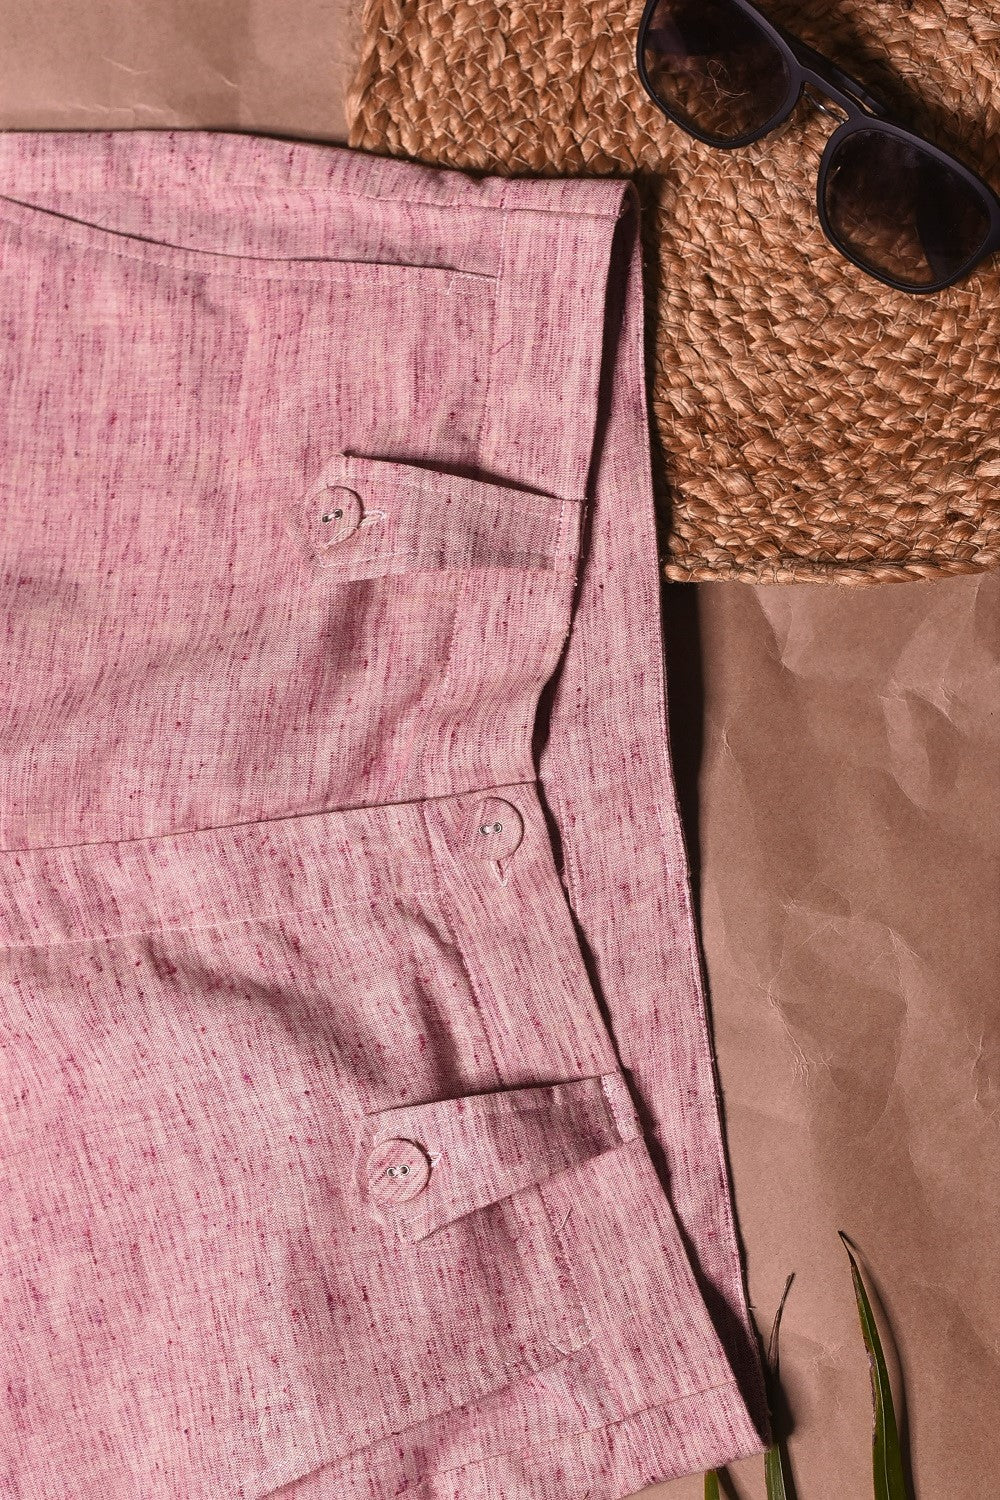 Pink Textured Pocket Shorts by Charkhee with Bottoms, Casual Wear, Cotton, Fitted at Waist, For Siblings, Less than $50, Mens Bottom, Menswear, Natural, Raspberry, Regular Fit, Shorts, Sun-dae by Charkhee, Textured at Kamakhyaa for sustainable fashion